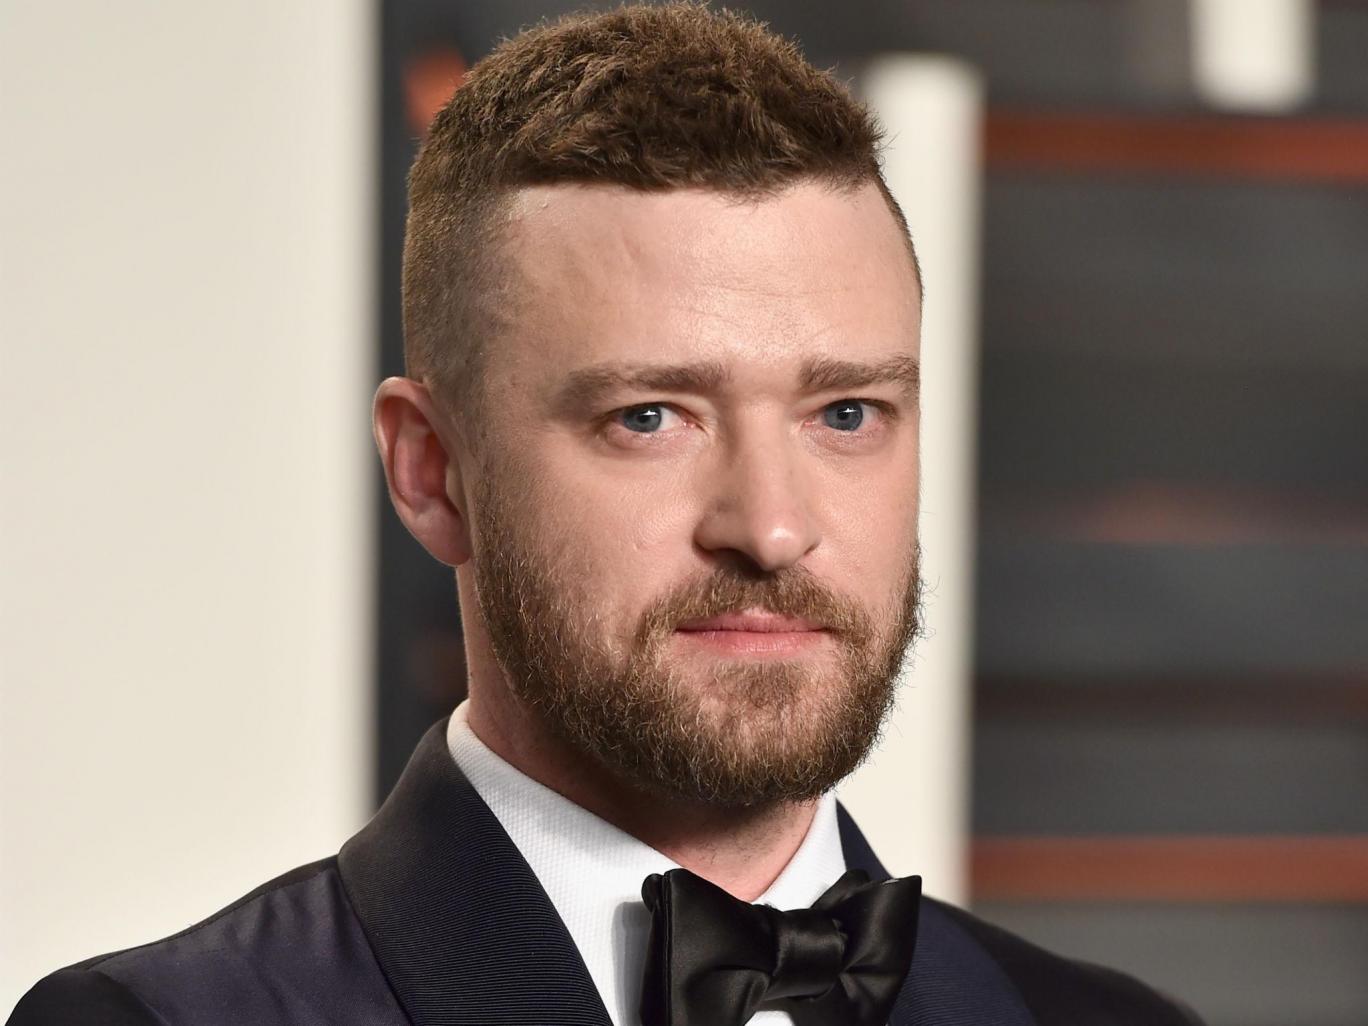 Justin Timberlake Hairstyles  Top 10 Most Popular Celebrity Hairstyles for  Men  StylesGapcom